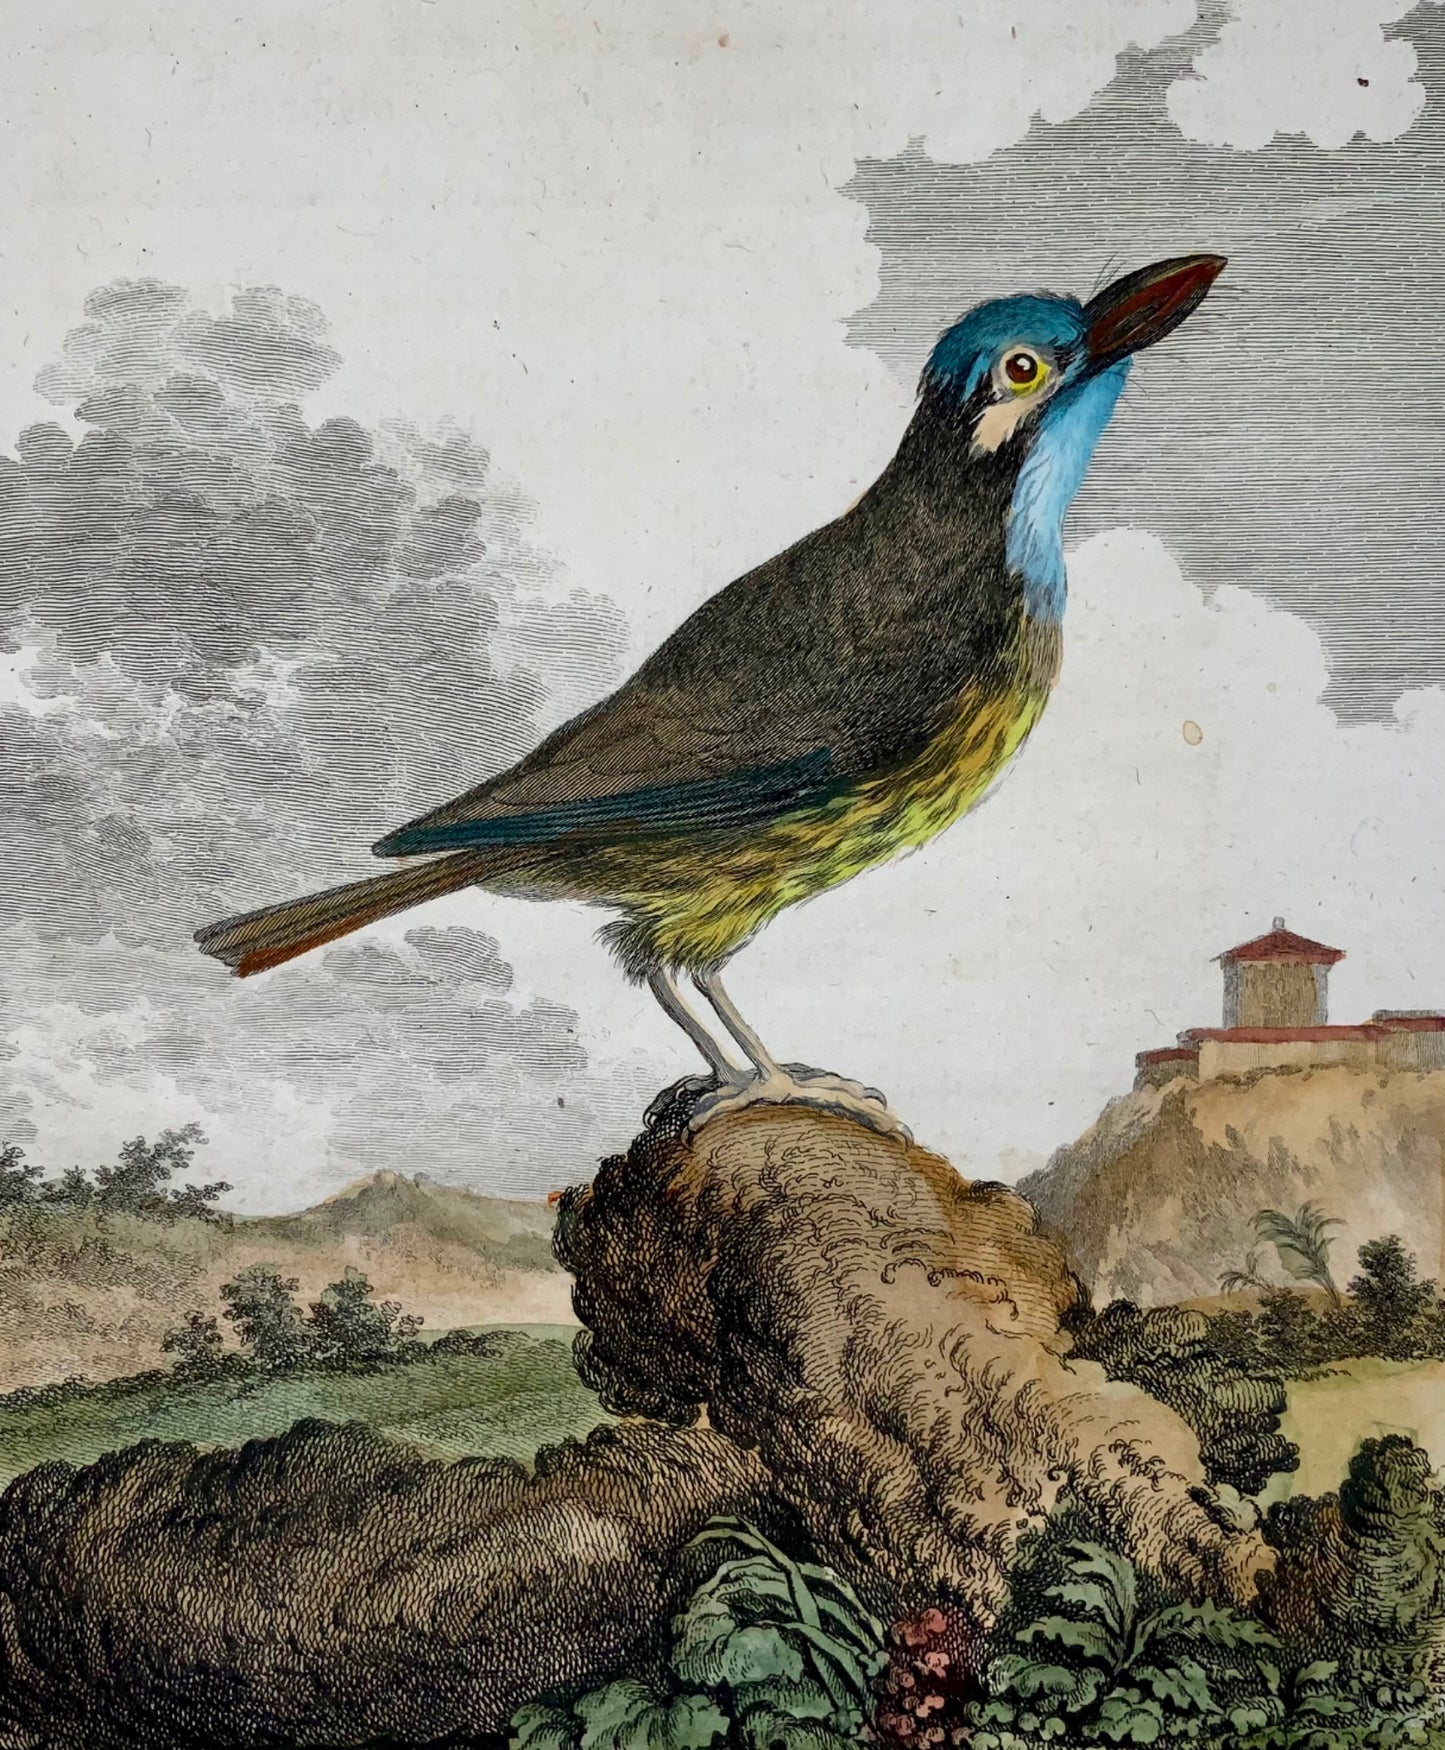 1779 de Seve, Barbet, ornithology, 4to large edition, hand coloured engraving